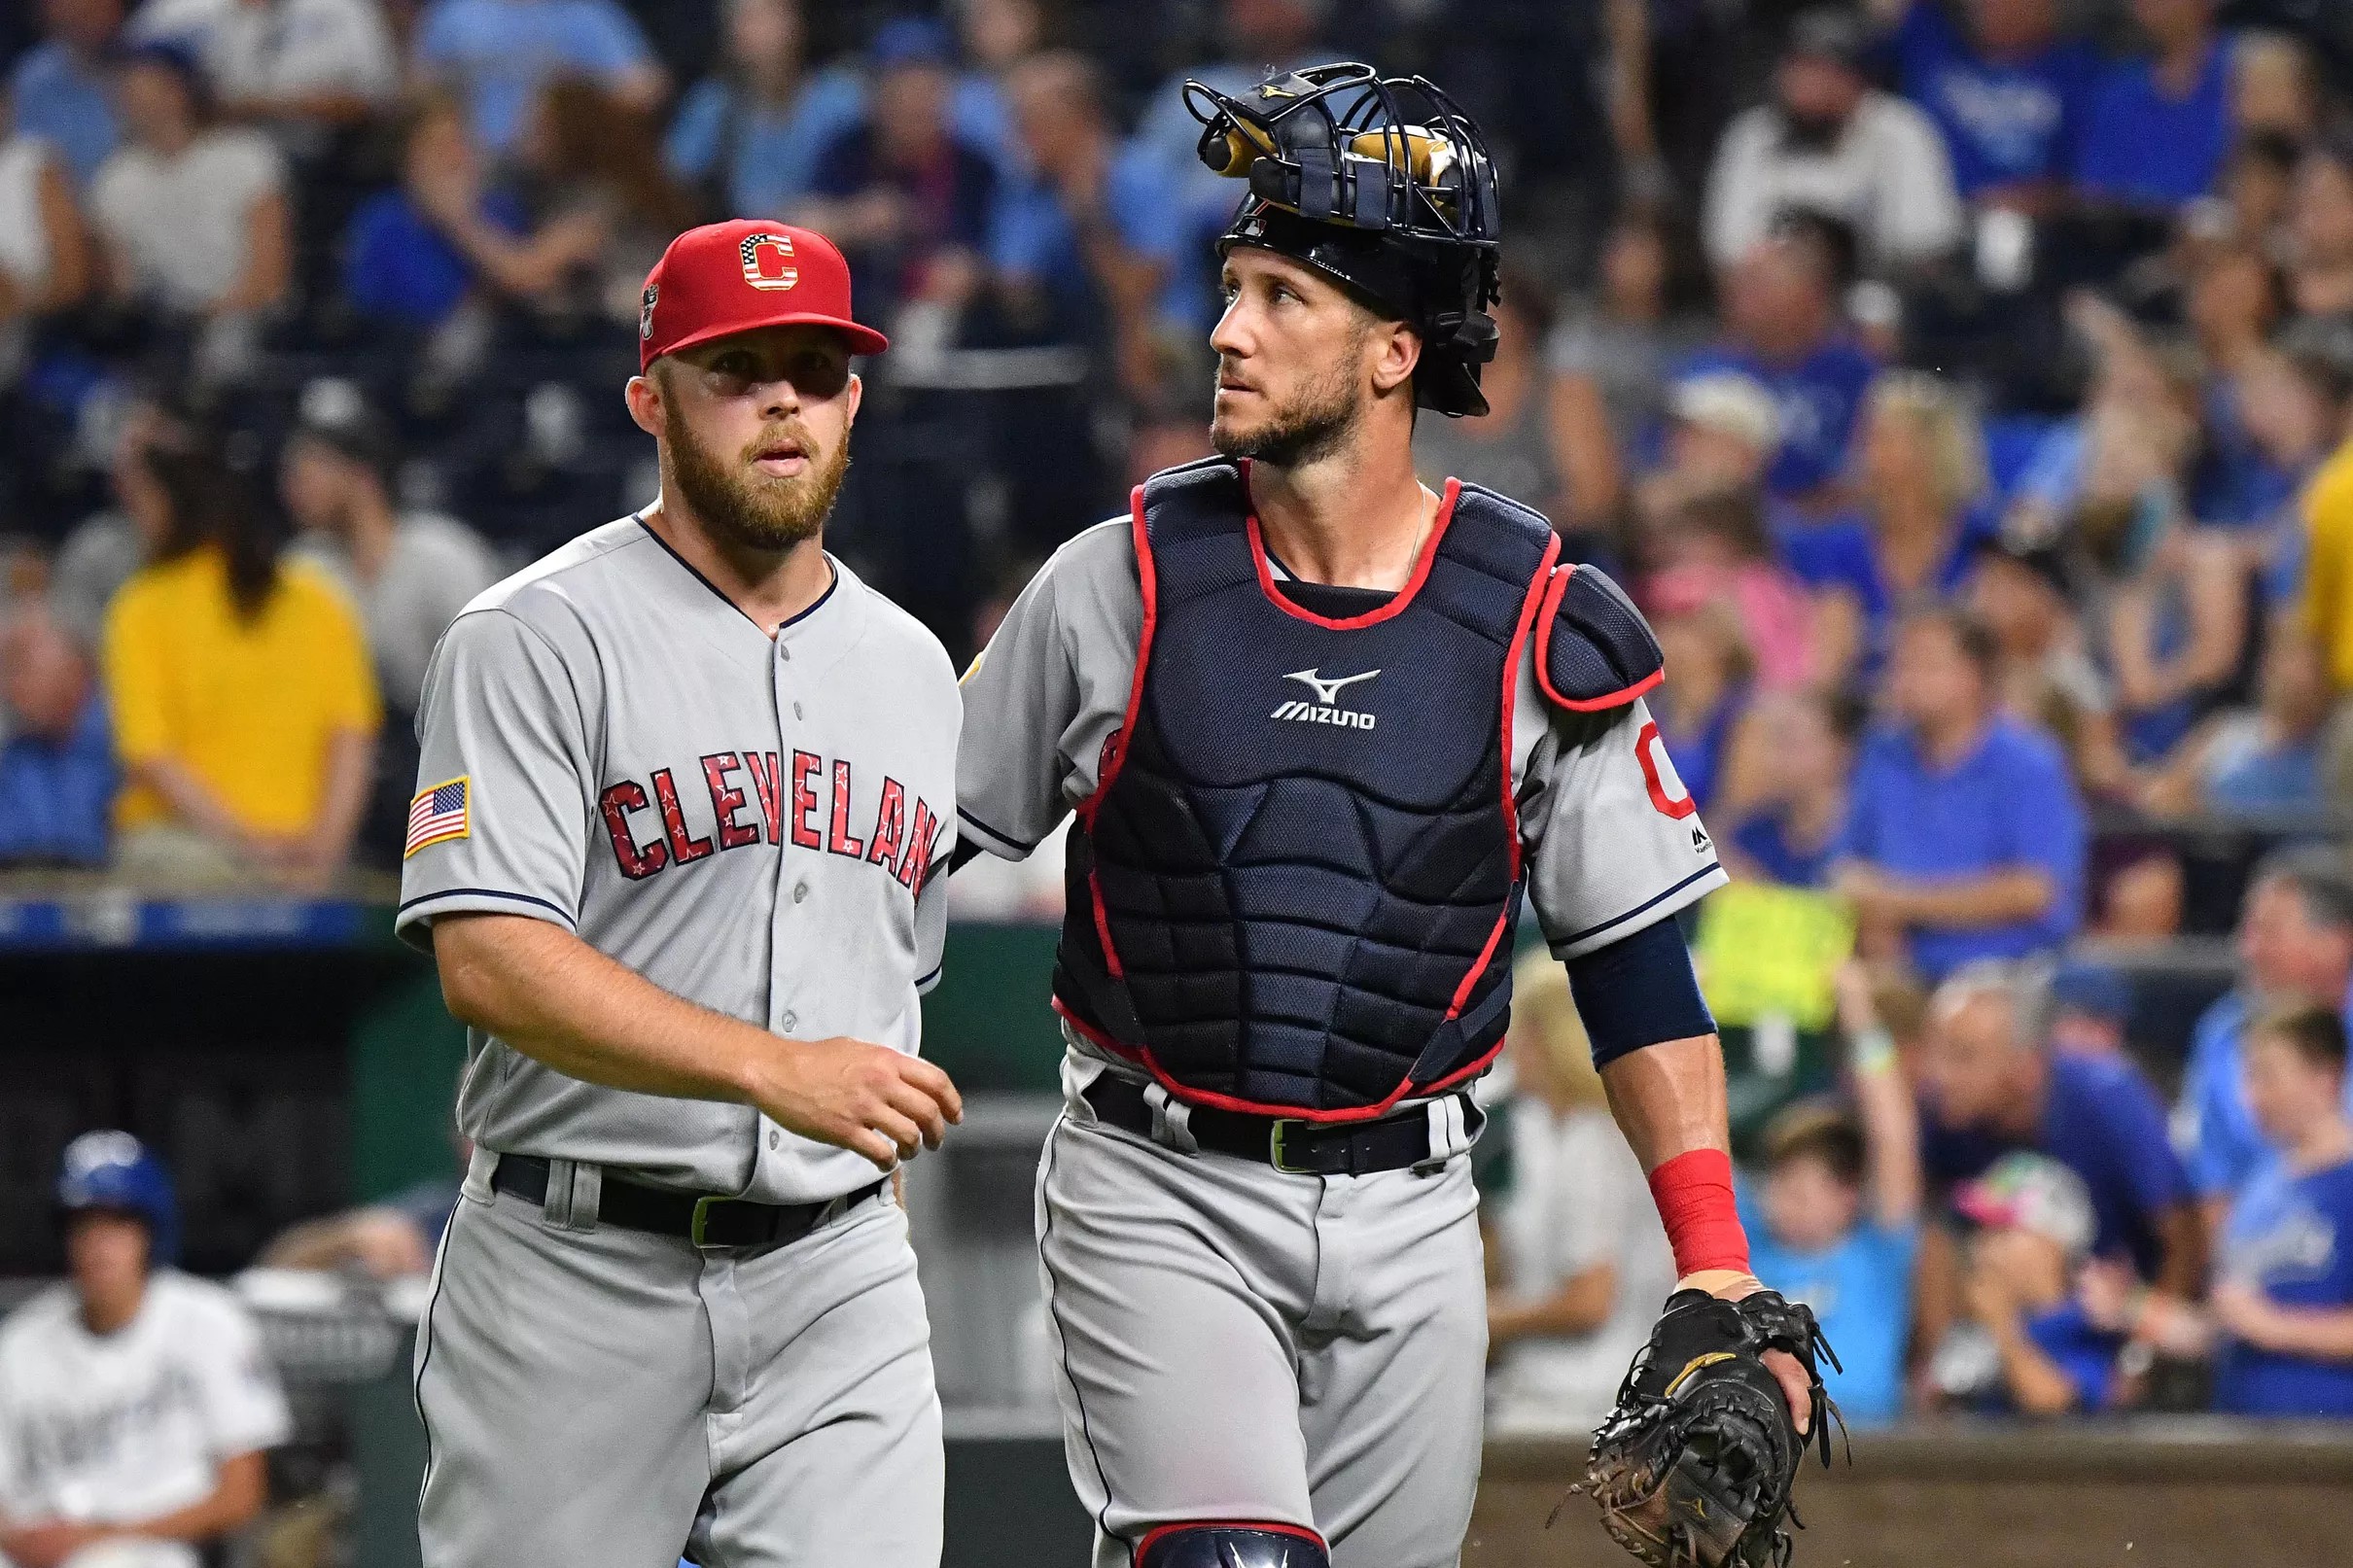 Cody Allen ties franchise record for career saves